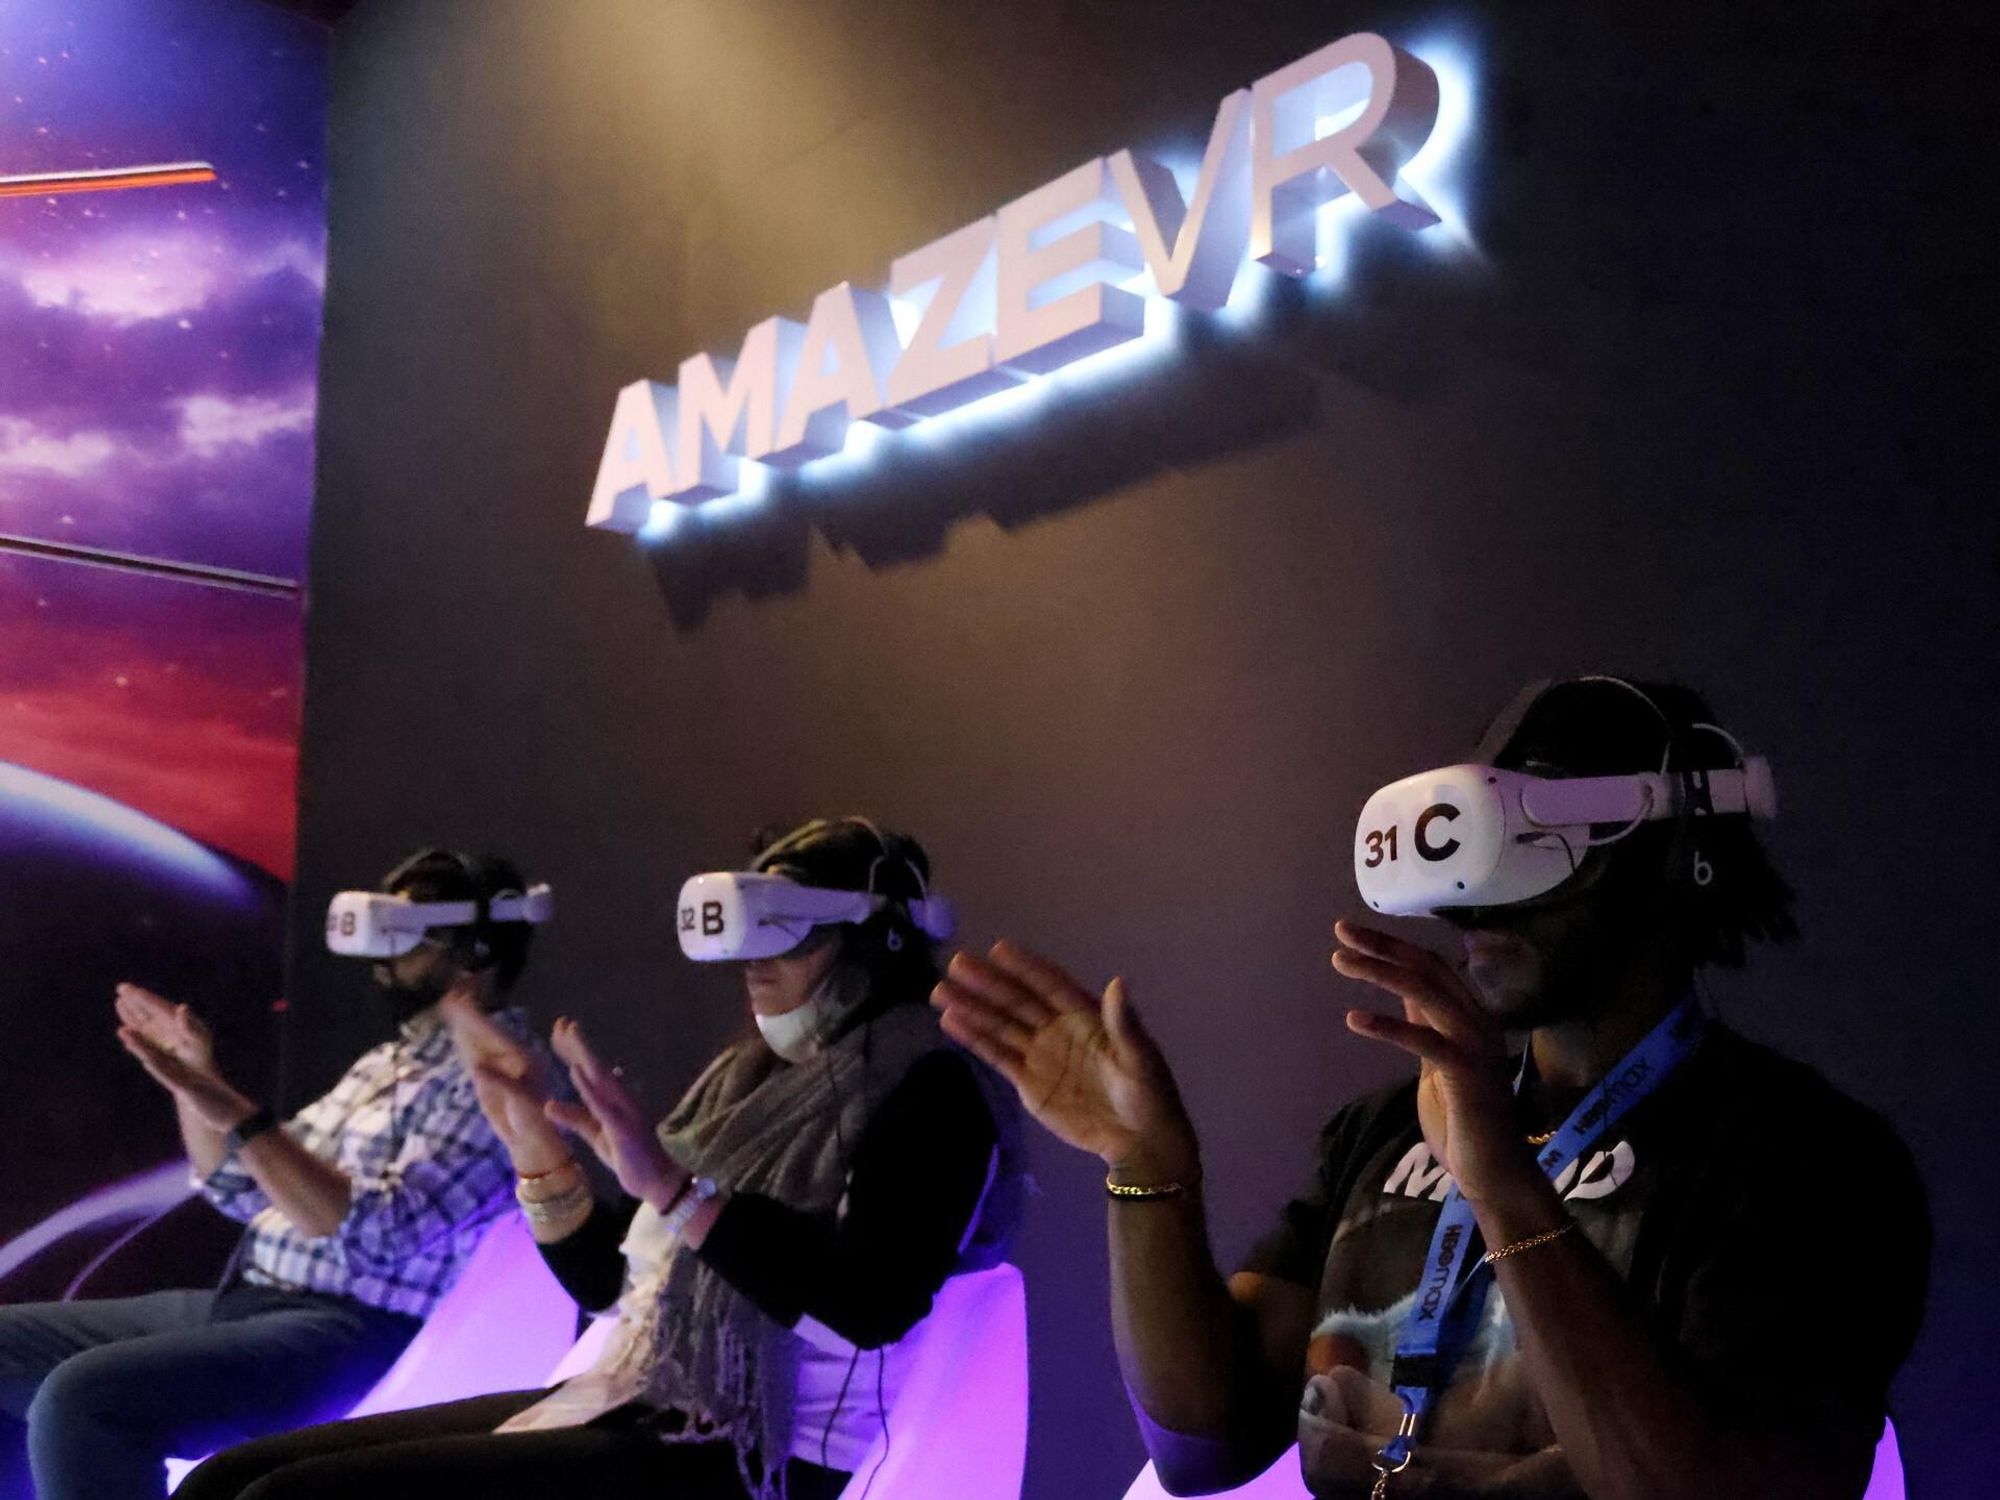 AmazeVR Goes Global As VR Concerts Enter New Phase